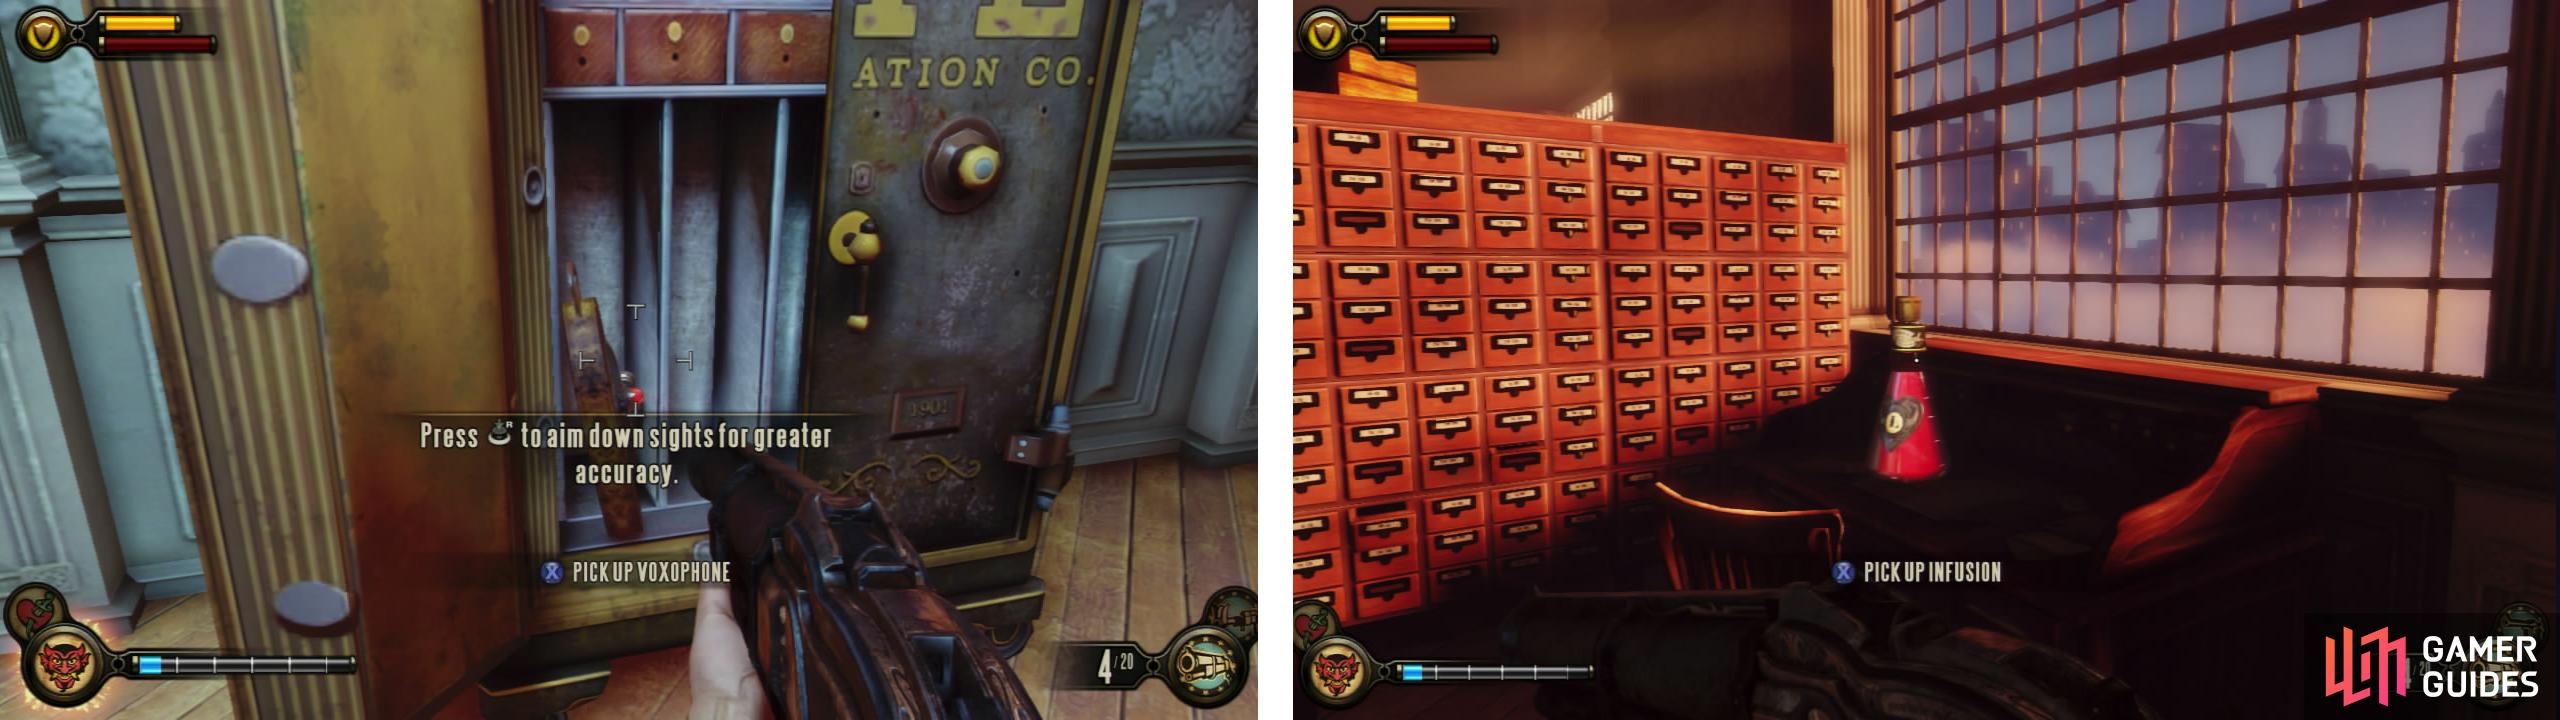 Unlock the door on the left of the main room to find an Infusion Upgrade (left) and Voxophone (right) inside.